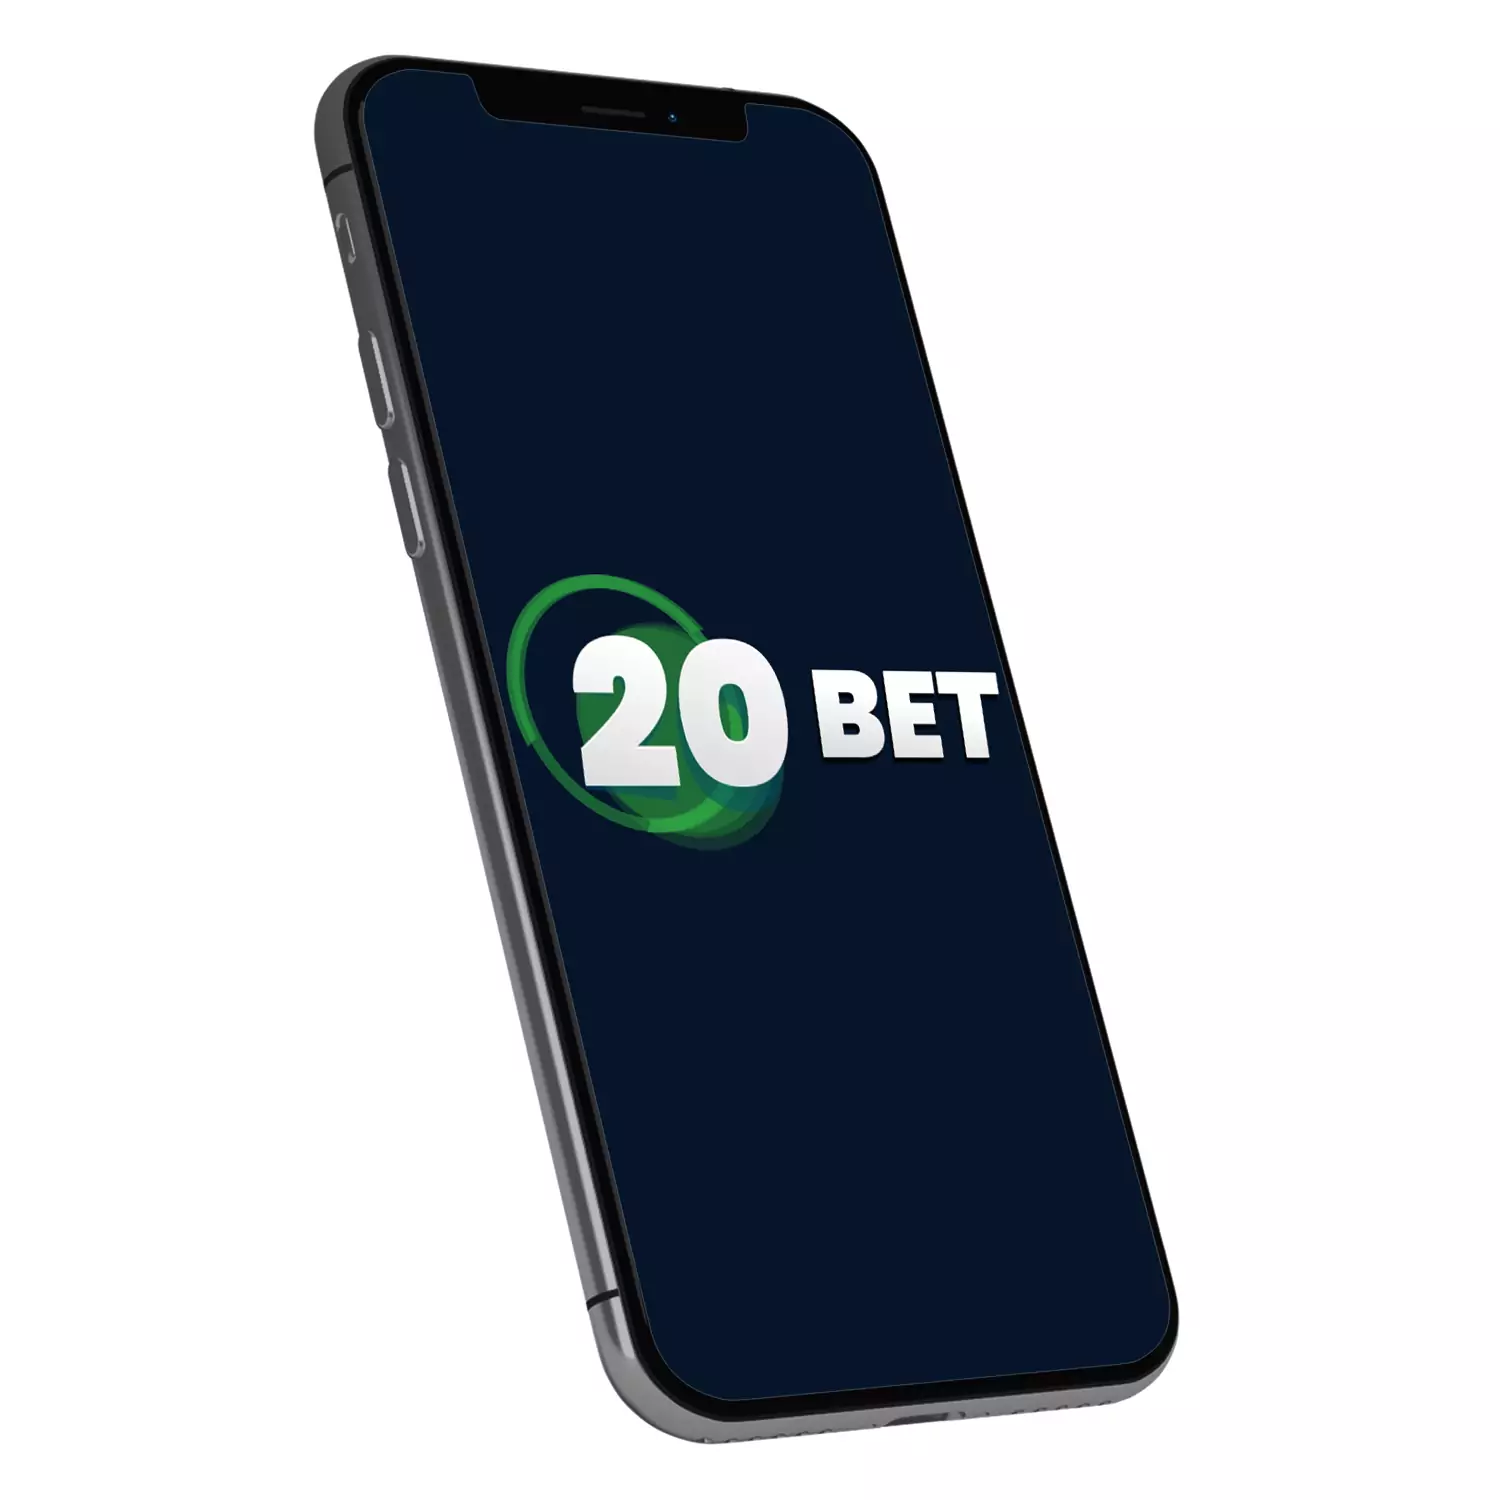 The 20Bet app is available for Android.